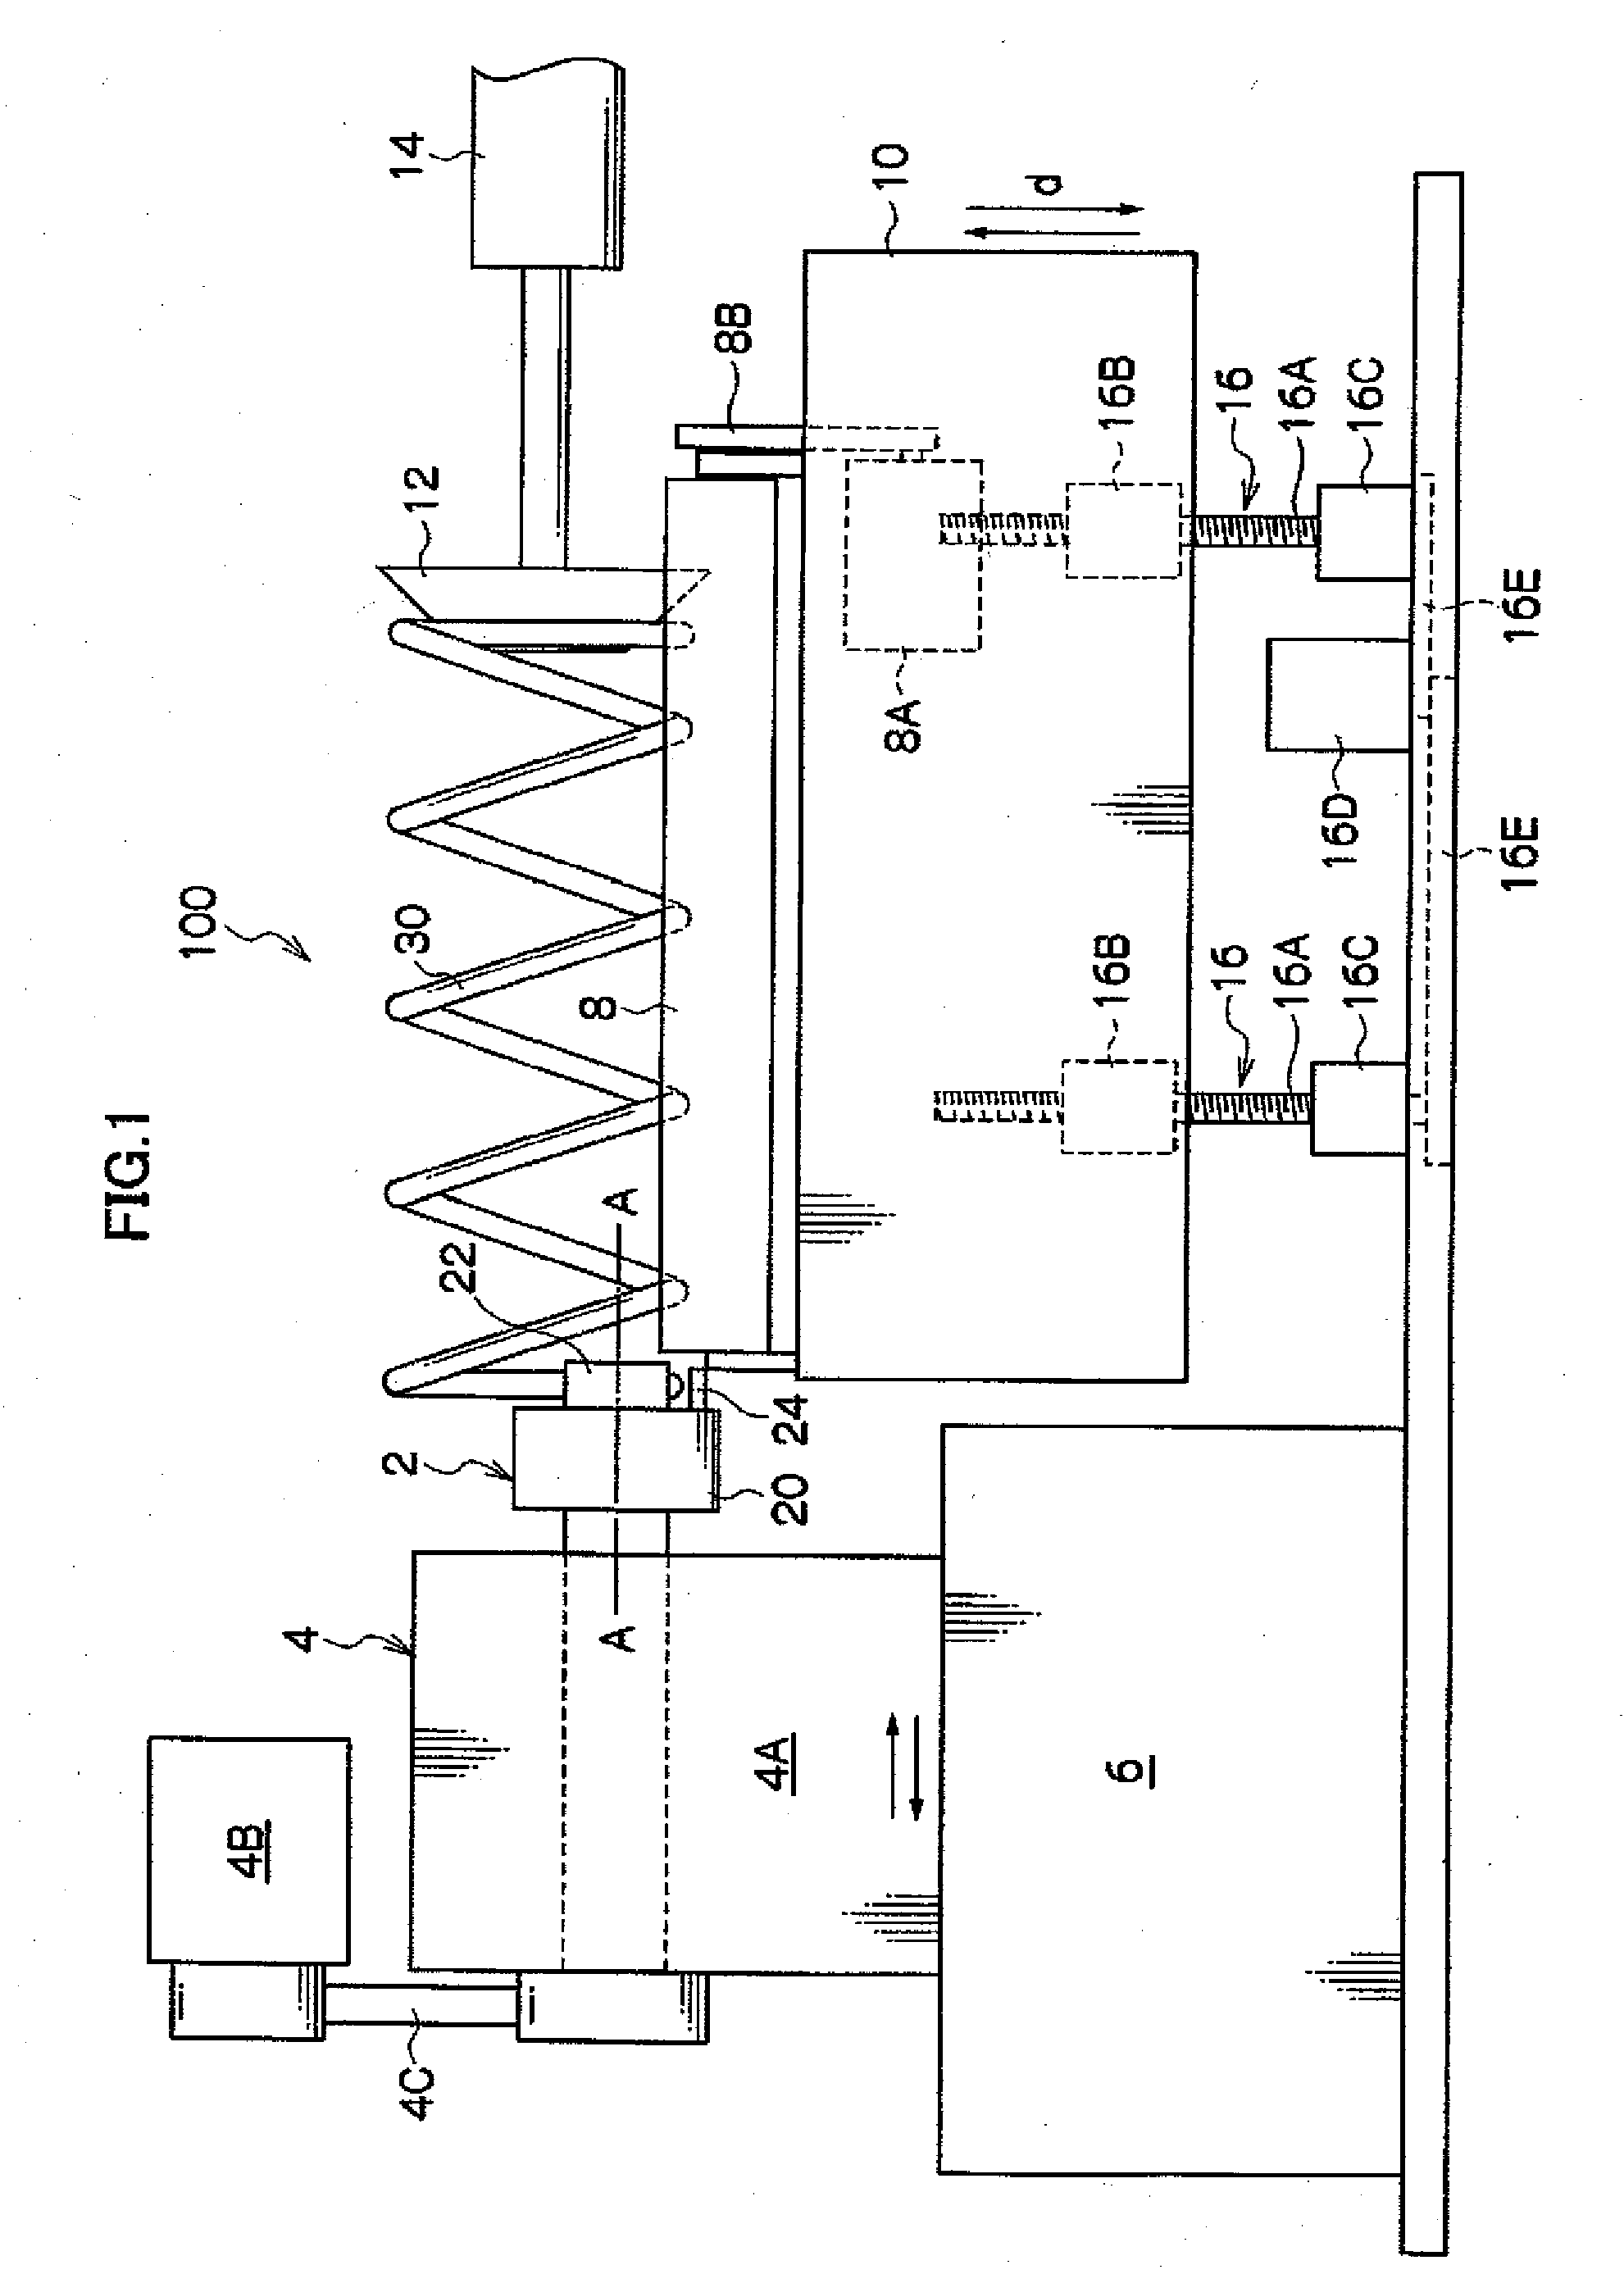 Device and method for forming end of coiled spring